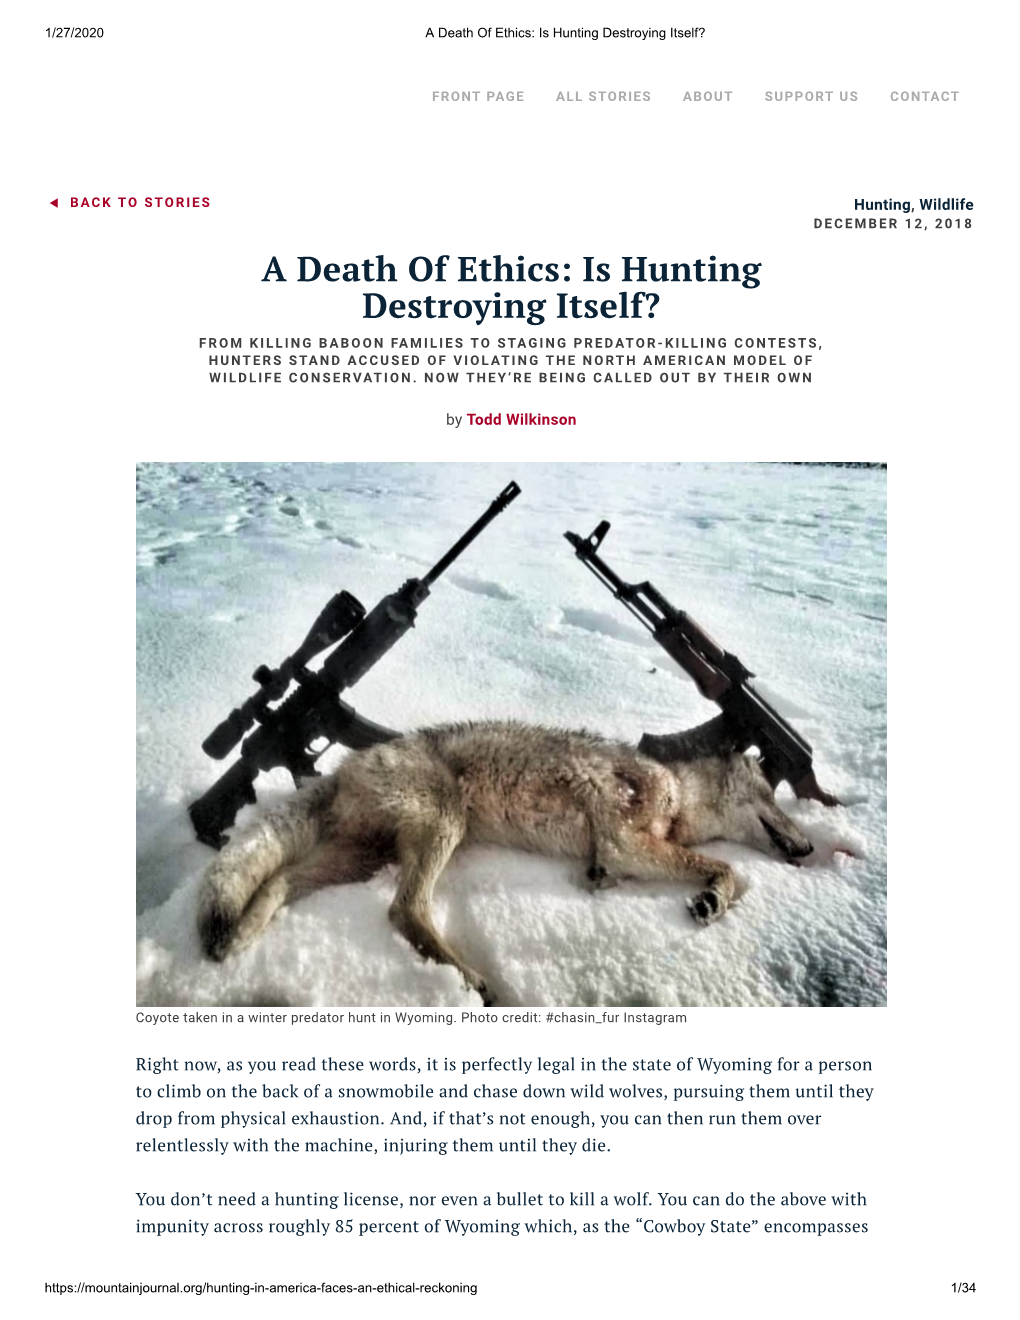 A Death of Ethics: Is Hunting Destroying Itself?